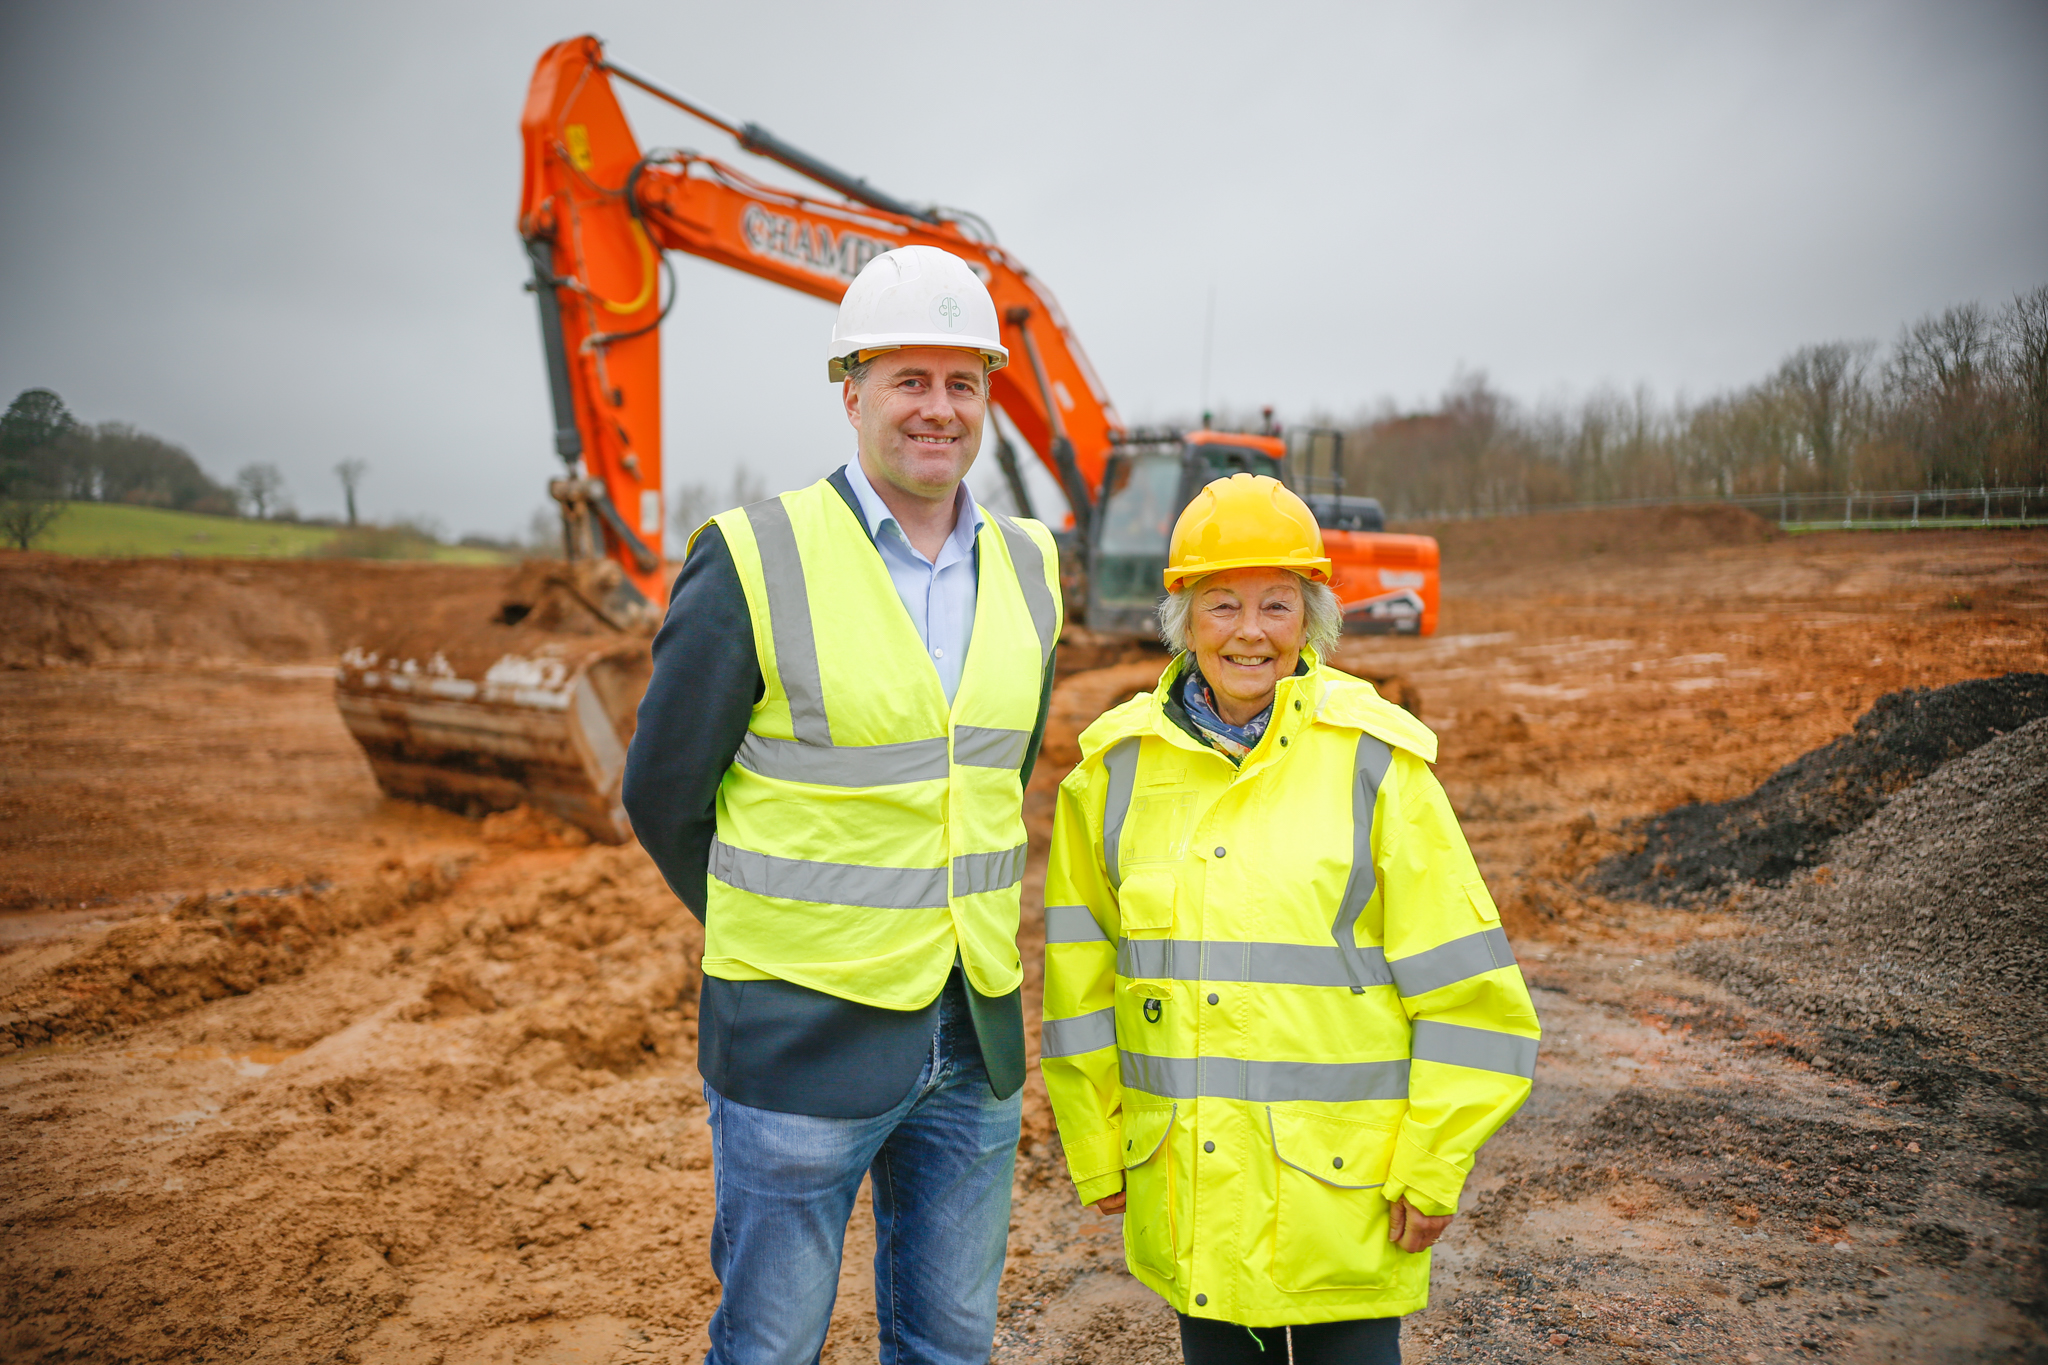 Leader of South Hams District Council helps Baker Estates launch  construction at Sawmills development in Dartington